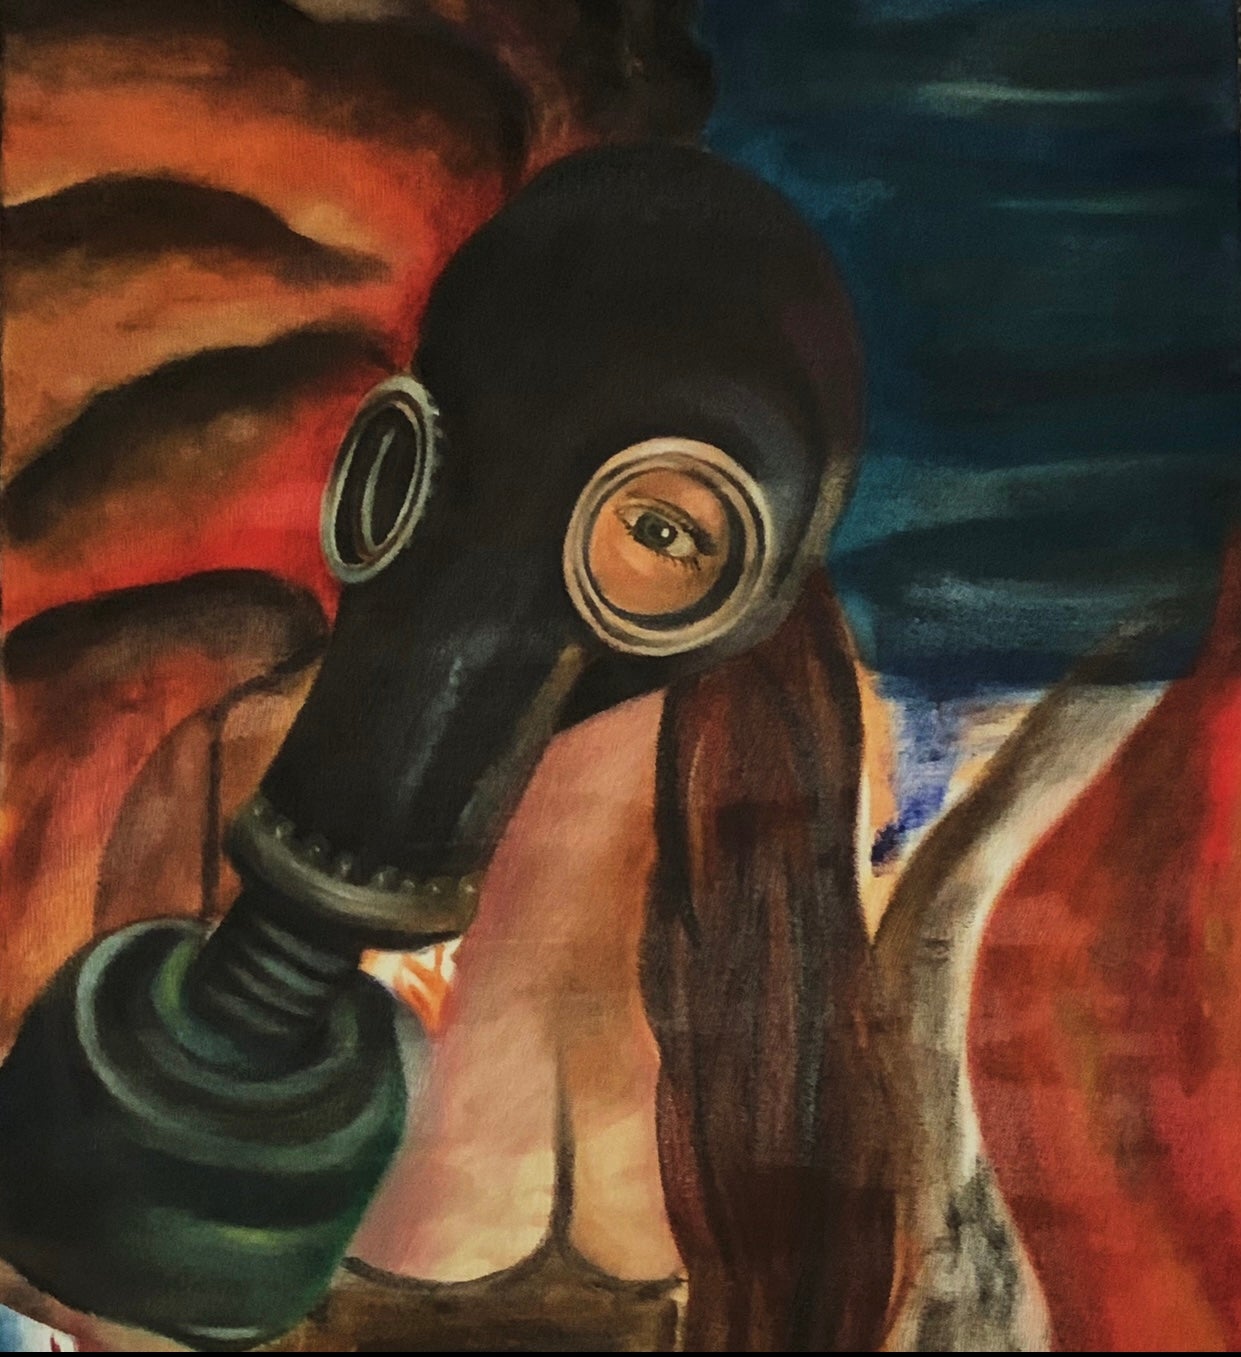 Art image from the student's poster